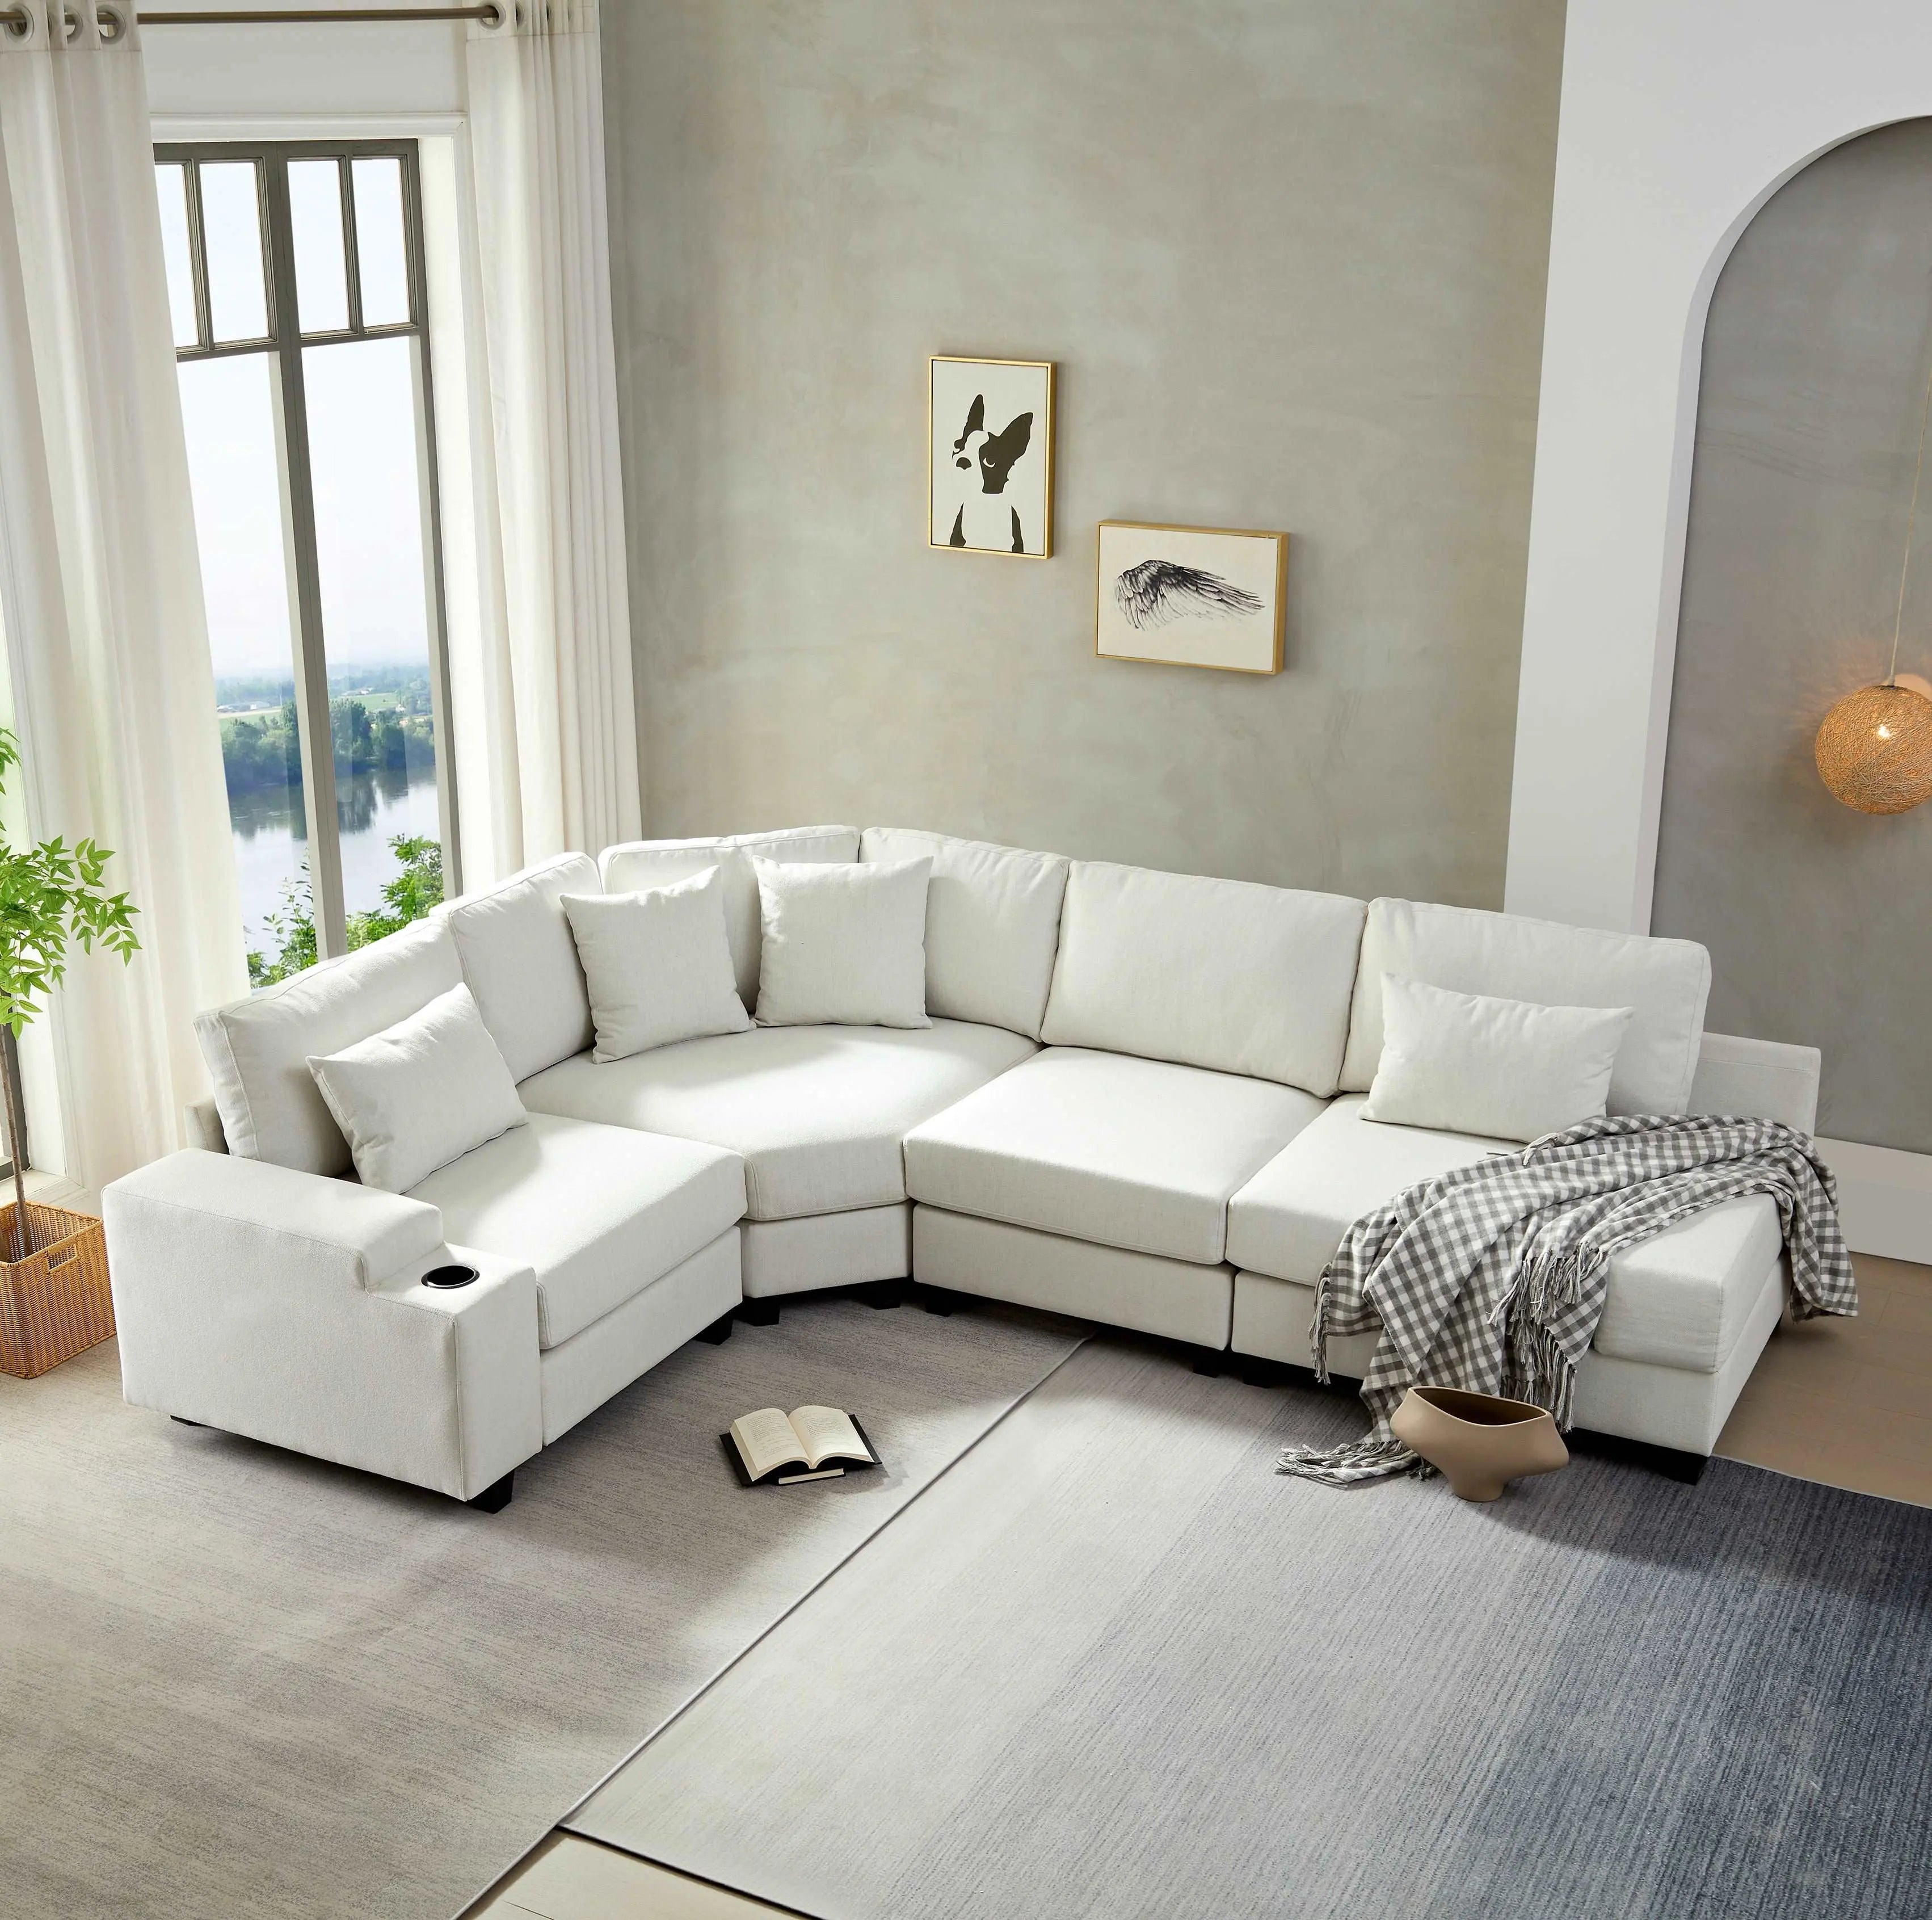 Bellemave 115.4" Stylish Modular Sofa Sectional with Polyester Upholstery with 4 Pillows and 1 Cup Holder